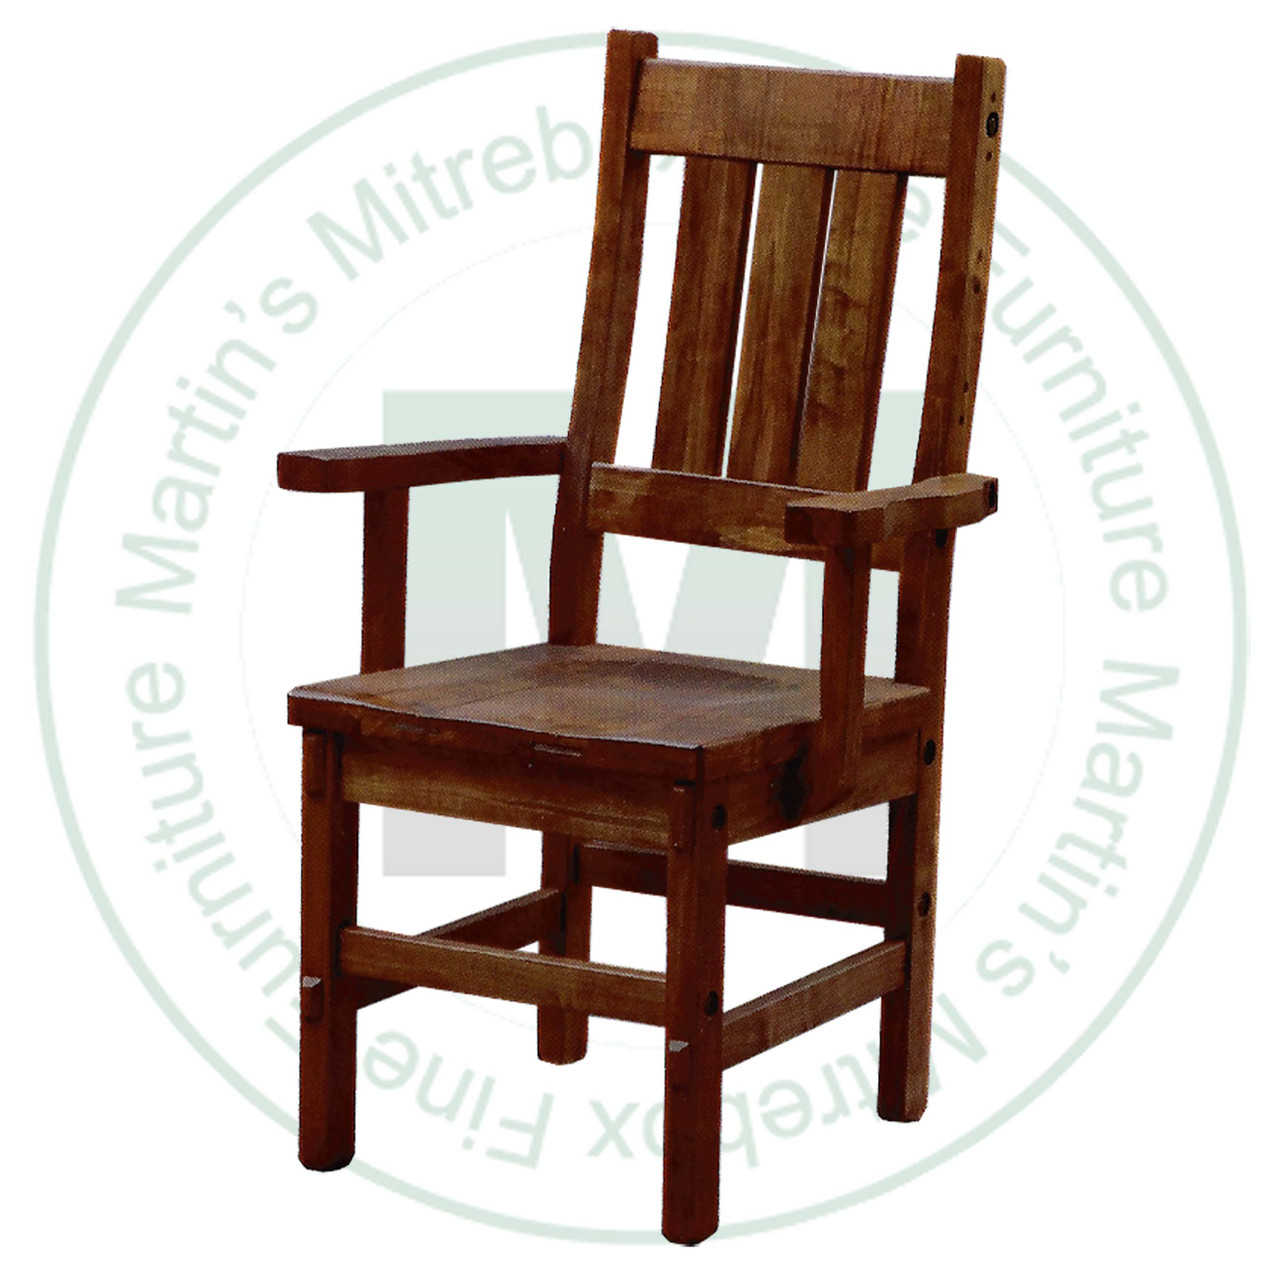 Pine Timber Slat Arm Chair With Wood Seat